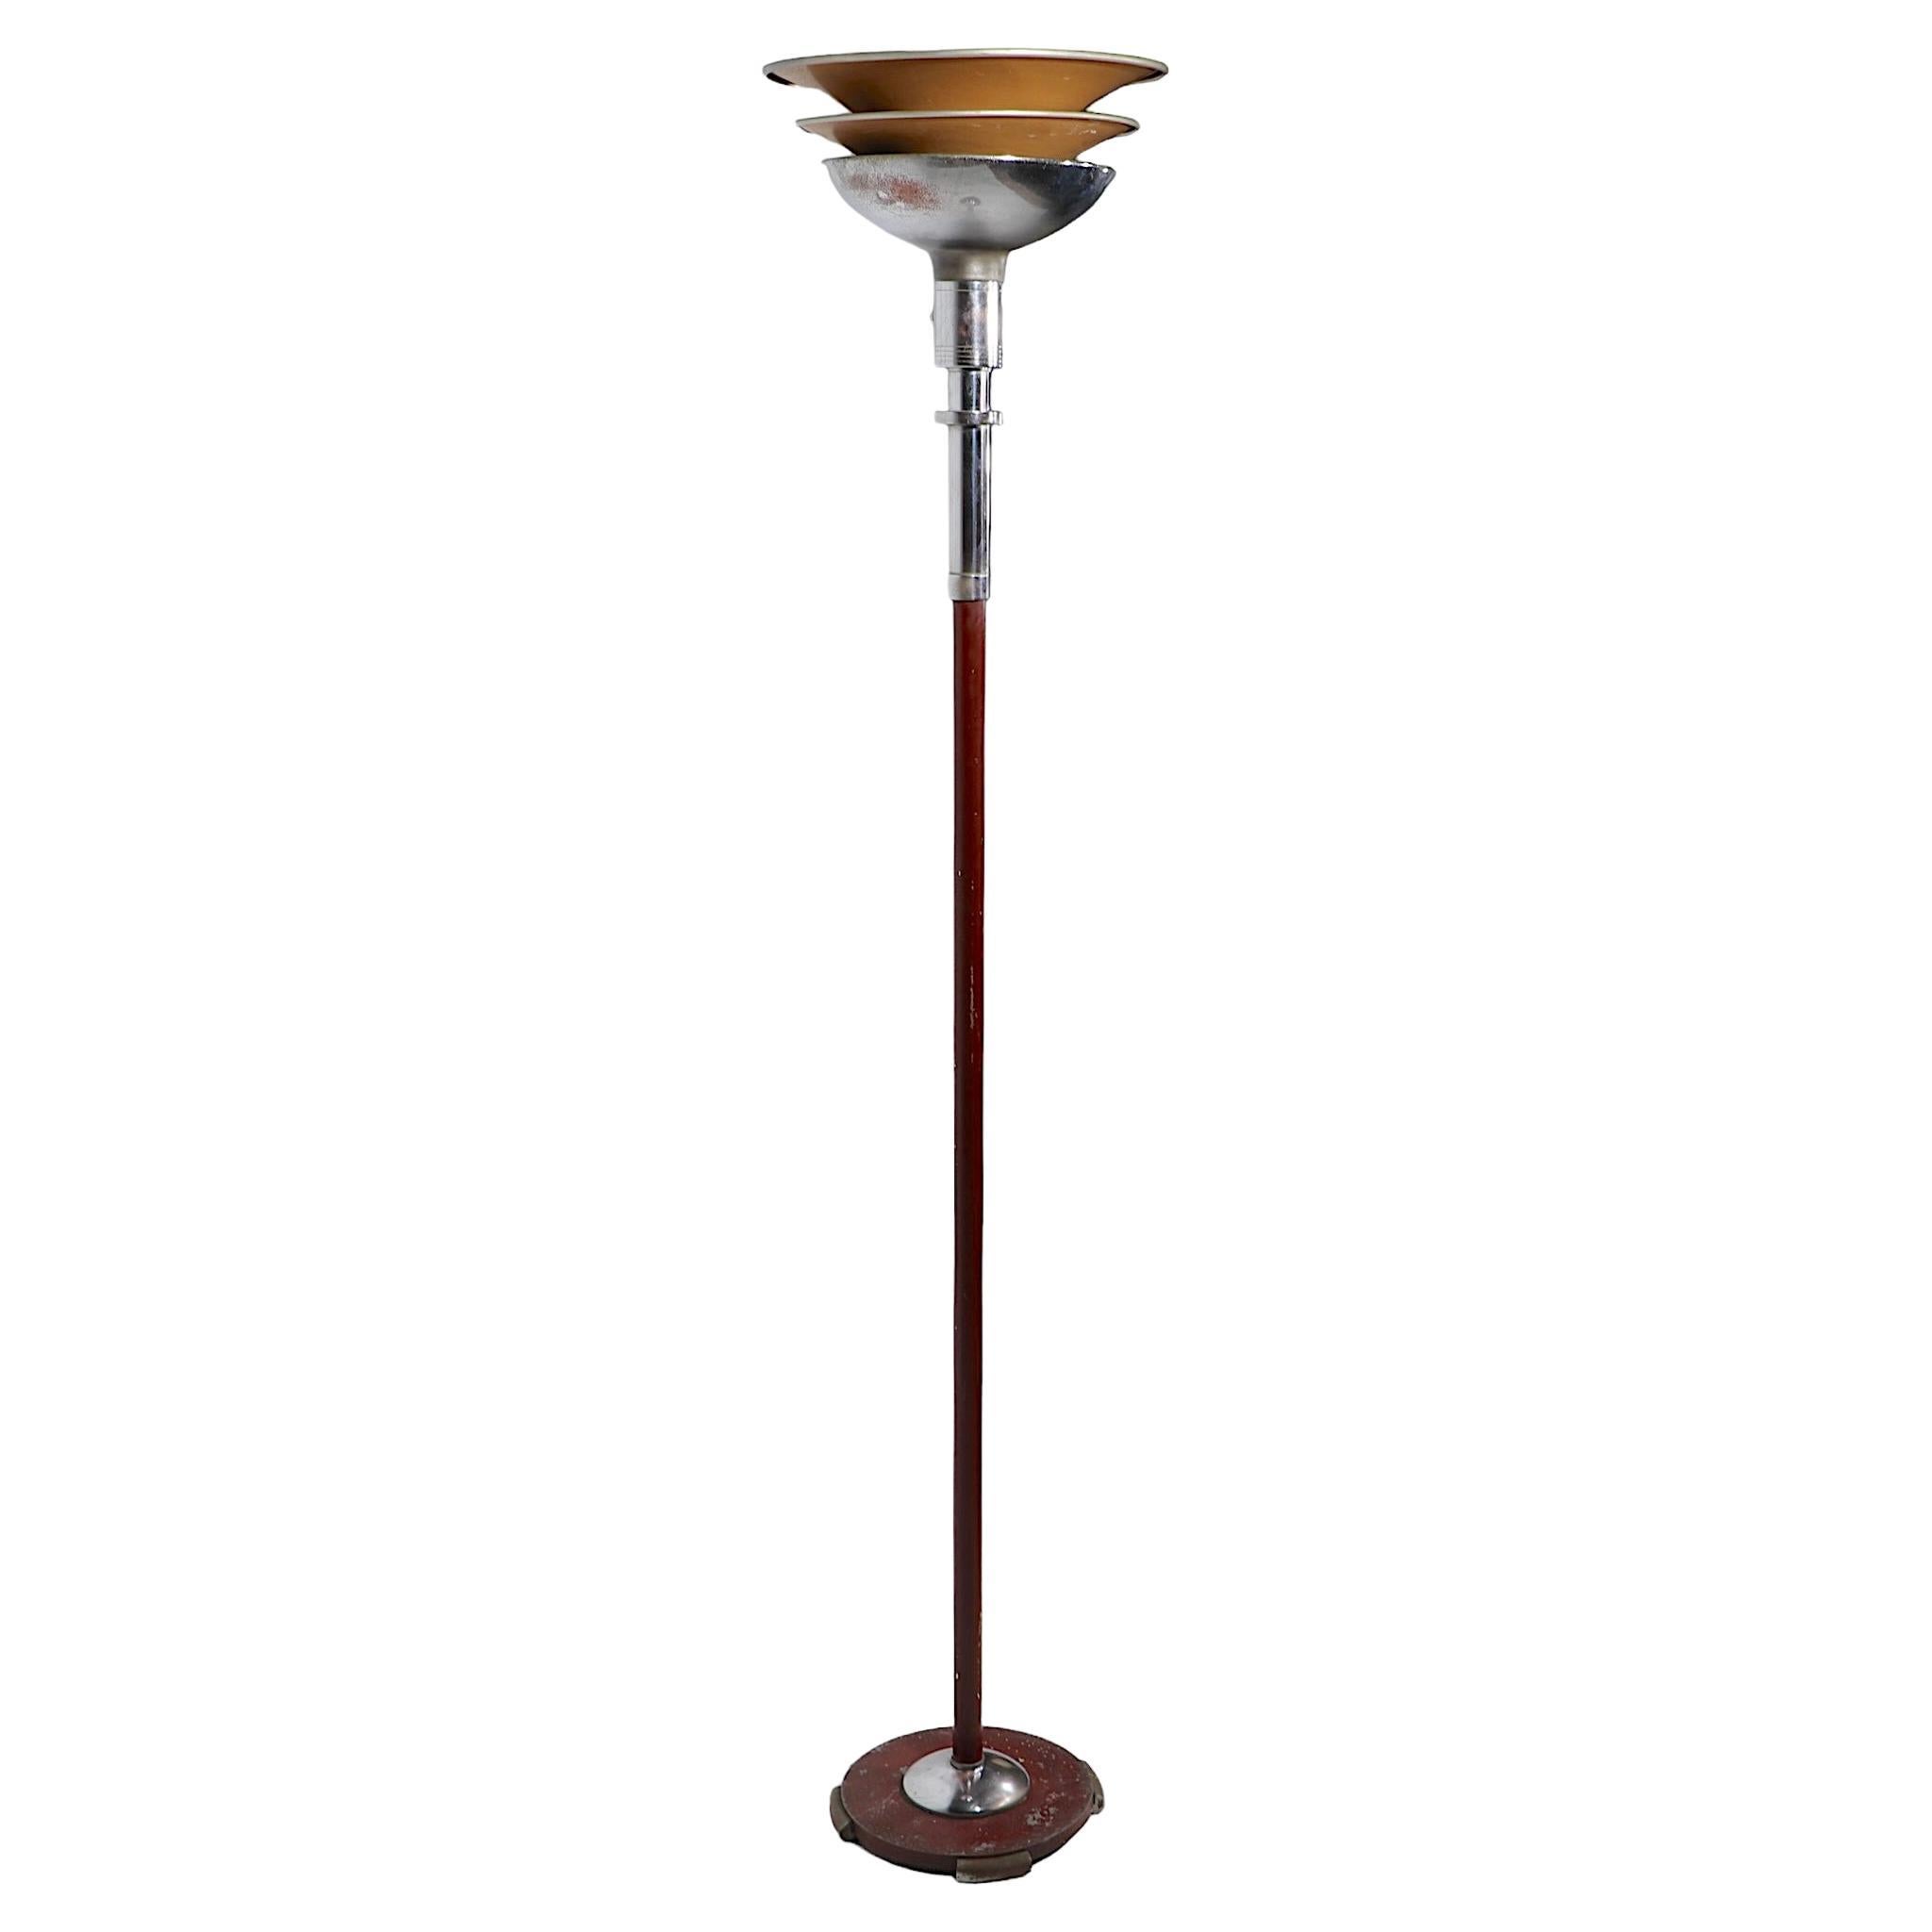 Art Deco Machine Age Torchiere  Floor Lamp by Rohde for Mutual Sunset Lamp Co. 